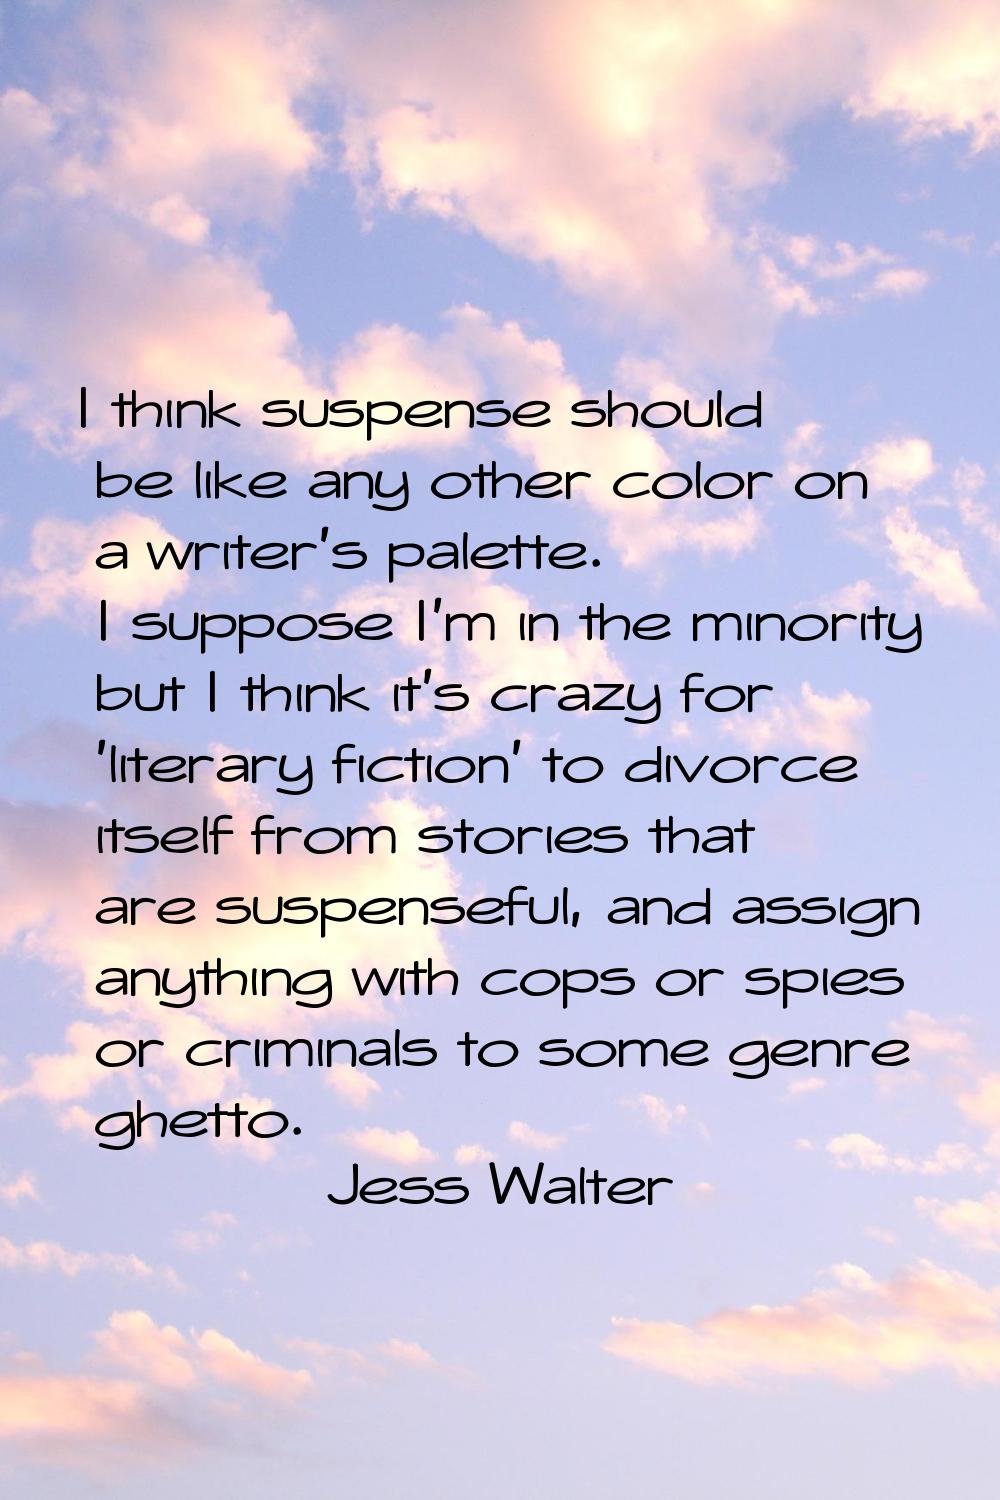 I think suspense should be like any other color on a writer's palette. I suppose I'm in the minorit